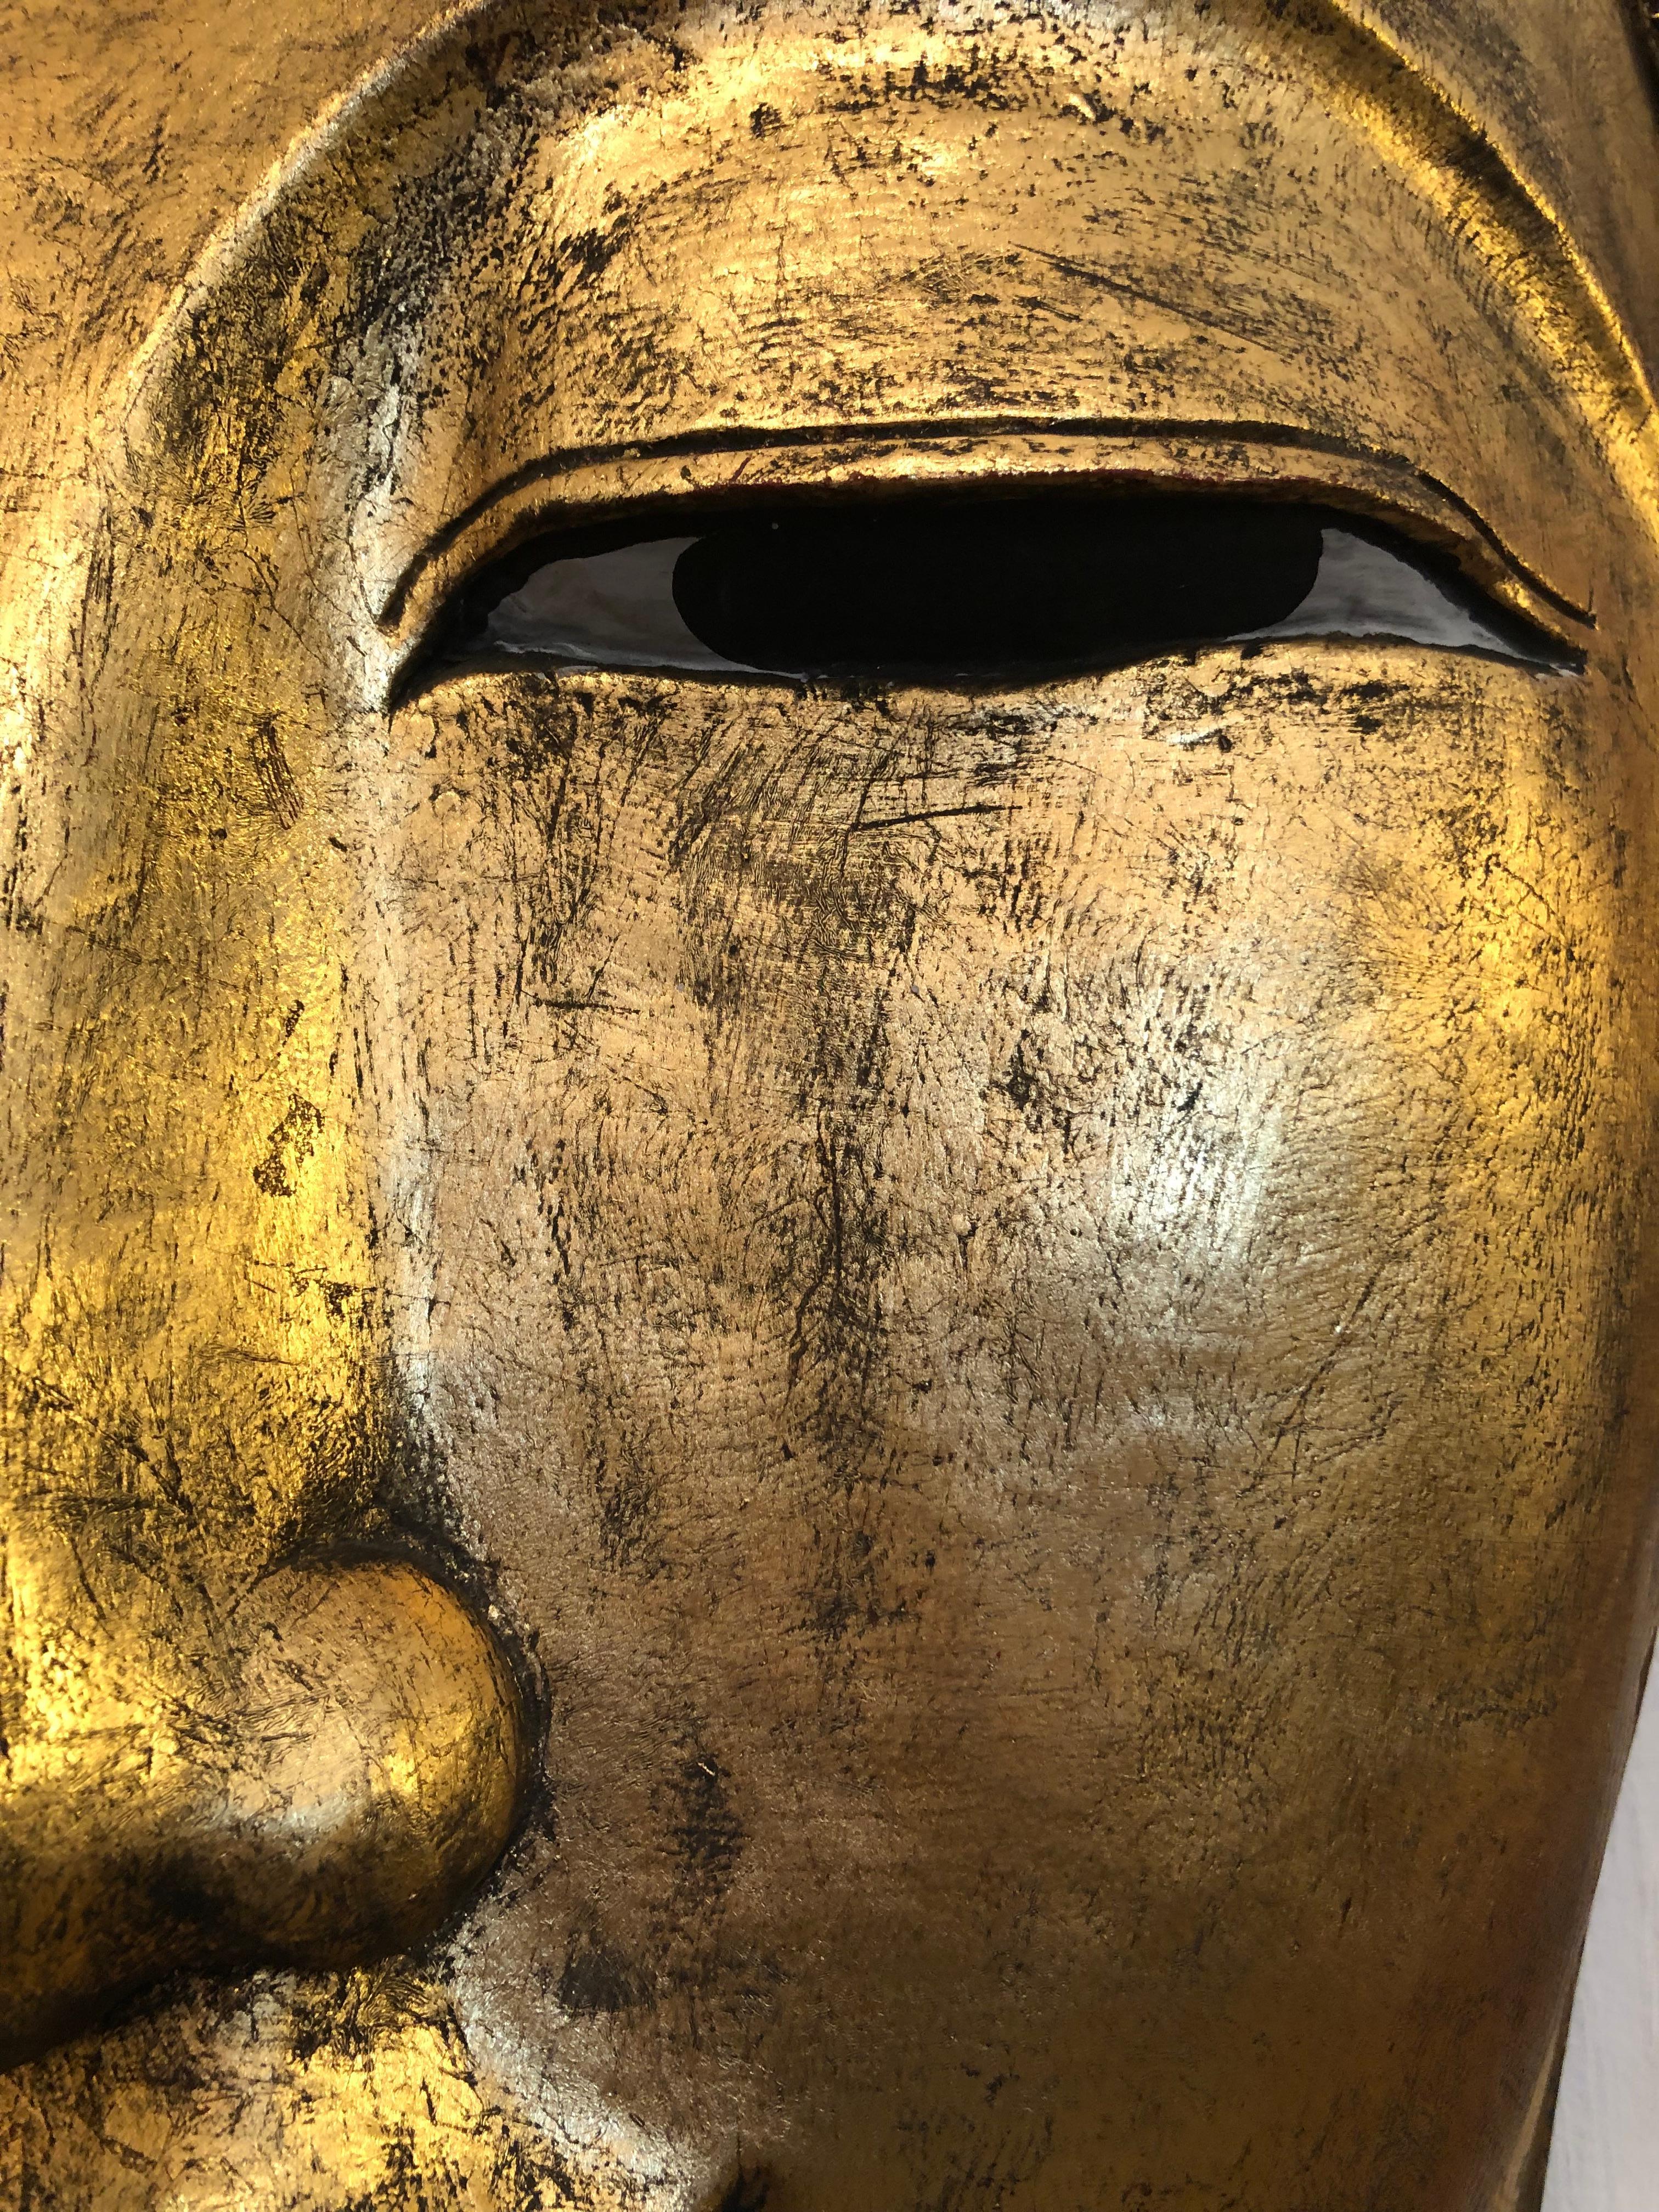 Gilt Eye Popping Very Large Imported Gilded and Embellished Buddha Head Wall Art For Sale